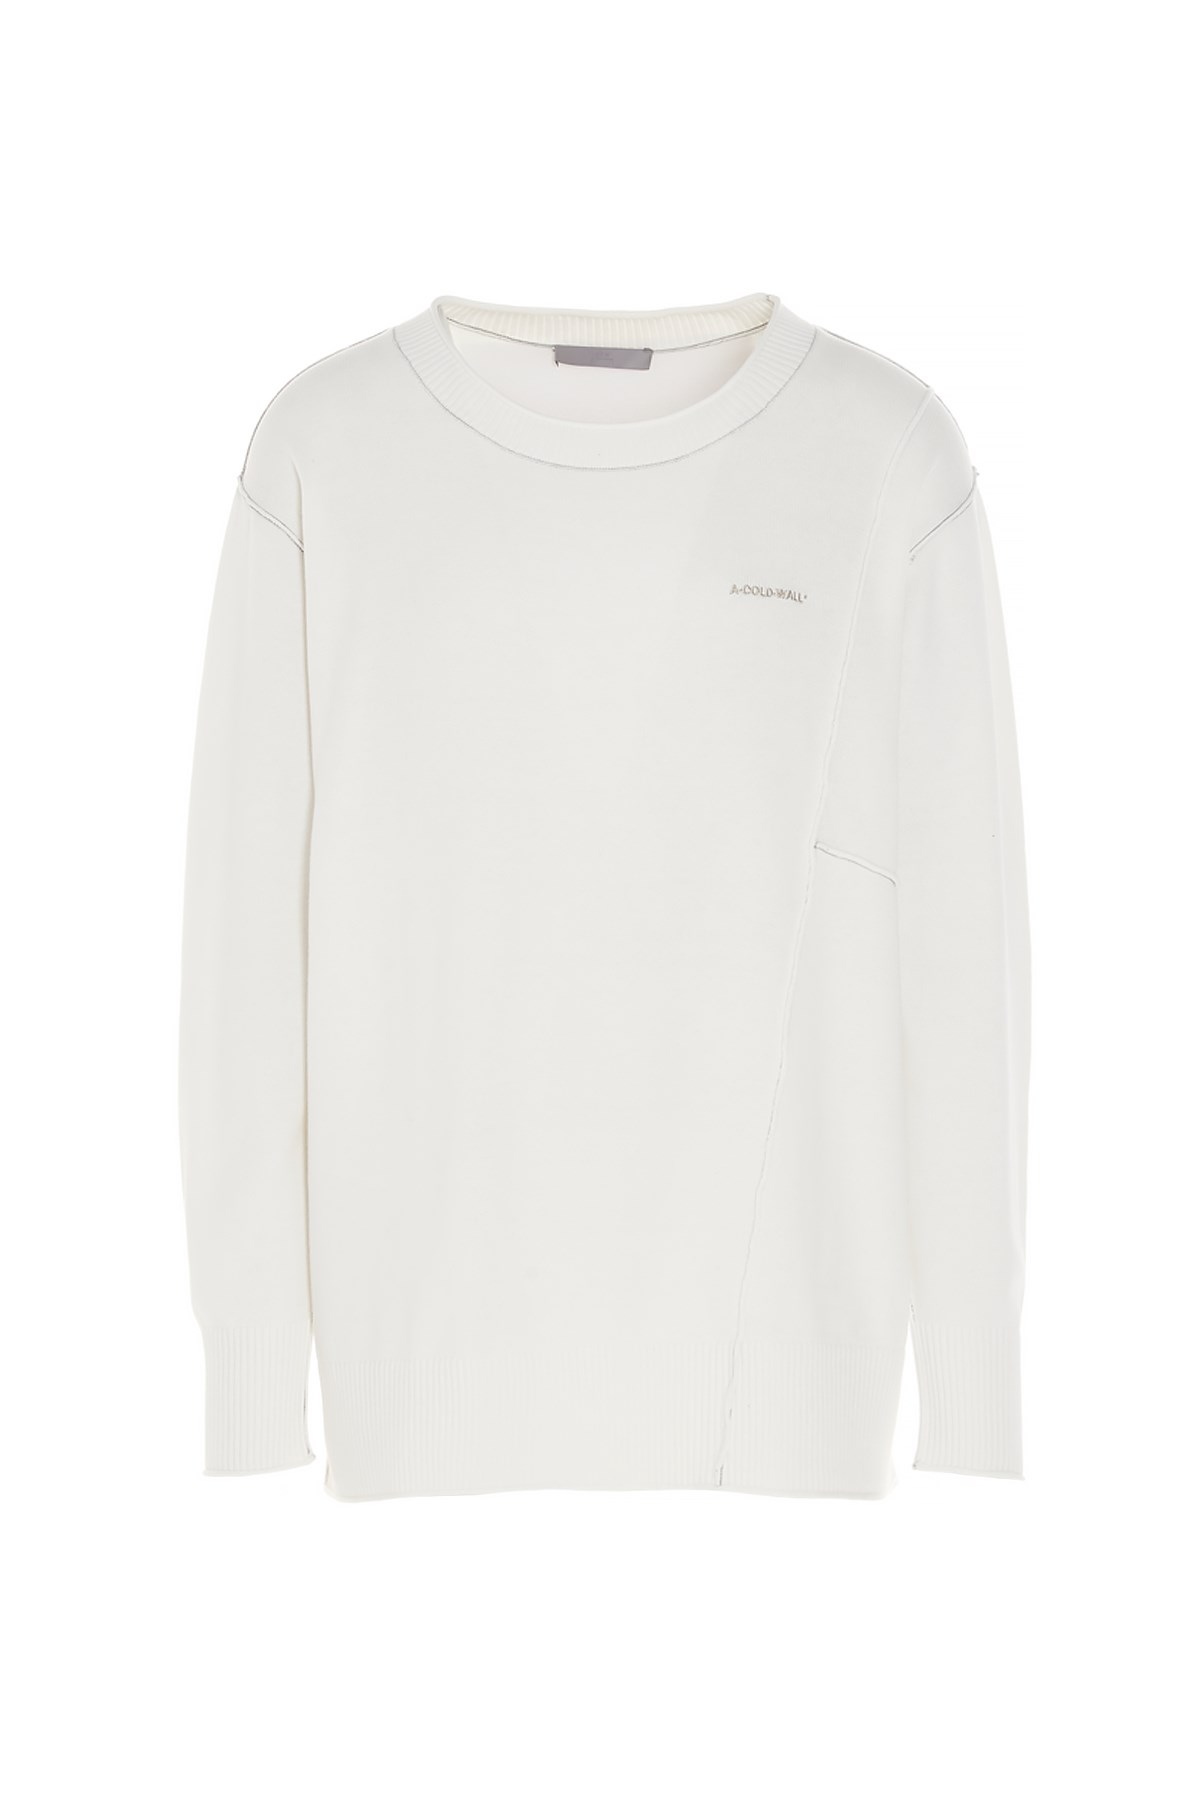 A-COLD-WALL* Essential Logo Sweater